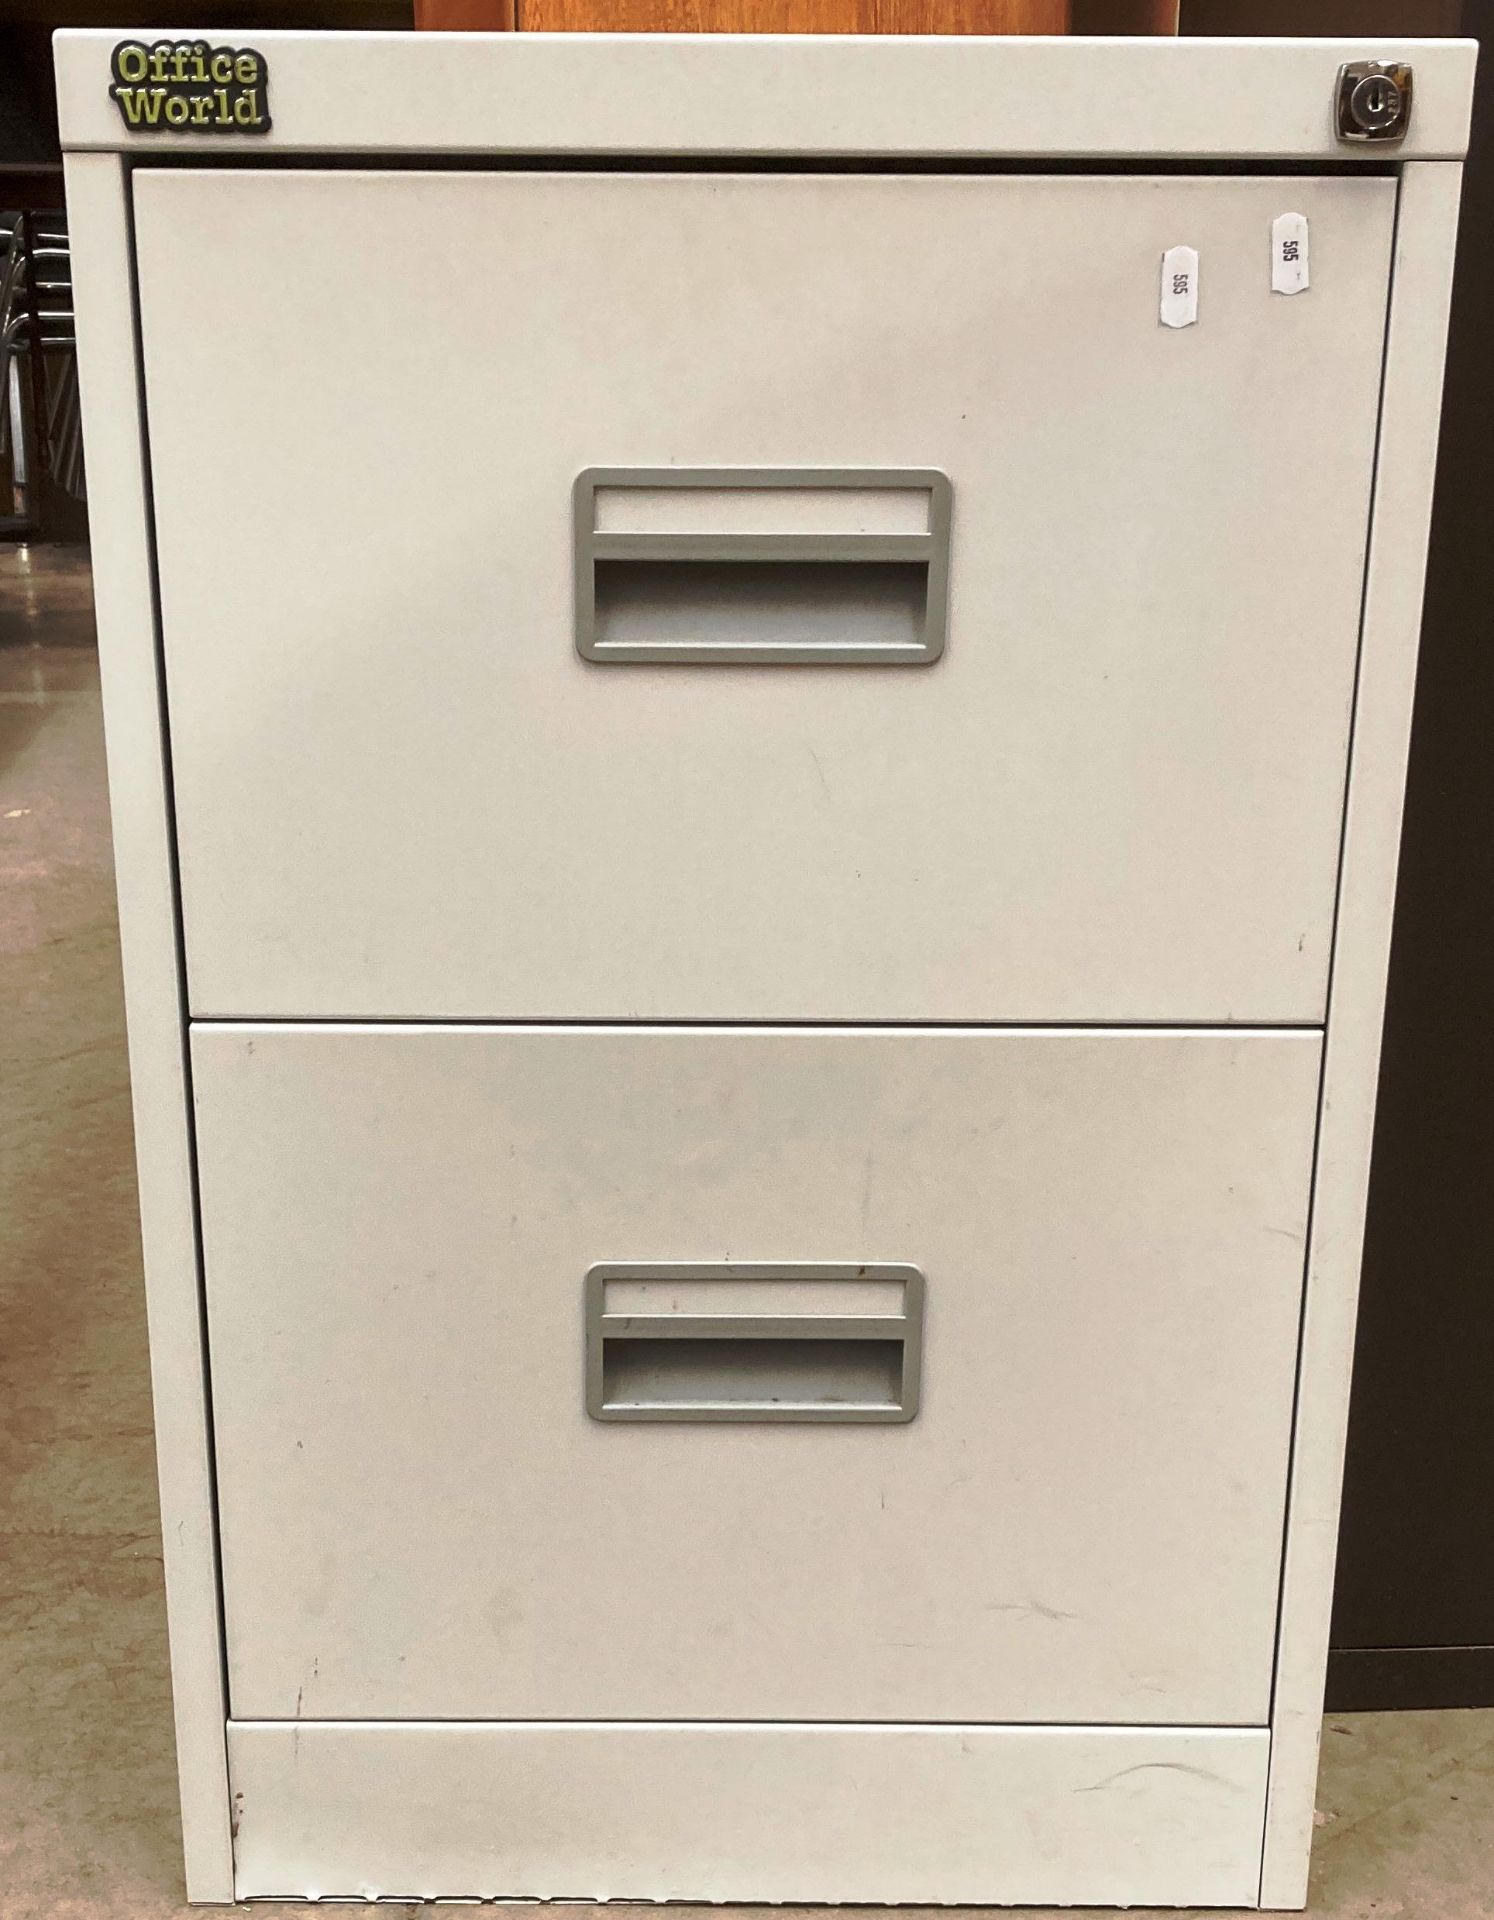 An Office World light grey metal two drawer filing cabinet